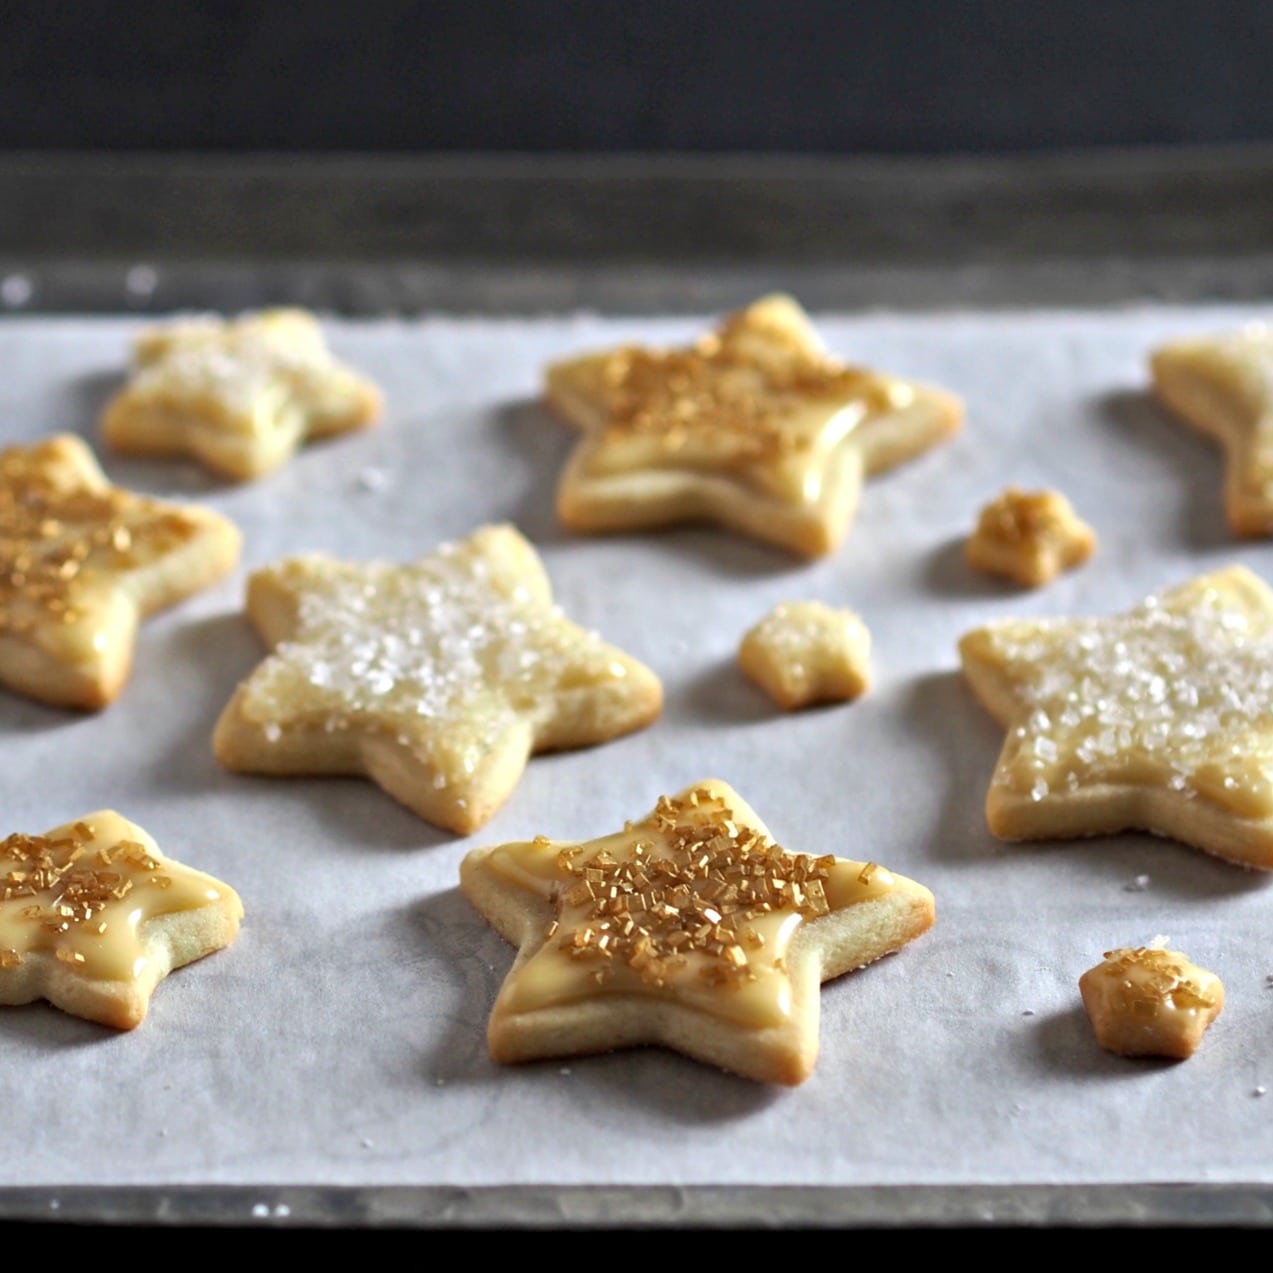 Gold Star Iced Cookies are a cookie deserving of a gold star. Tender inside & slightly crispy outside. Topped w/a simple corn syrup glaze & sanding sugar. Simply Sated